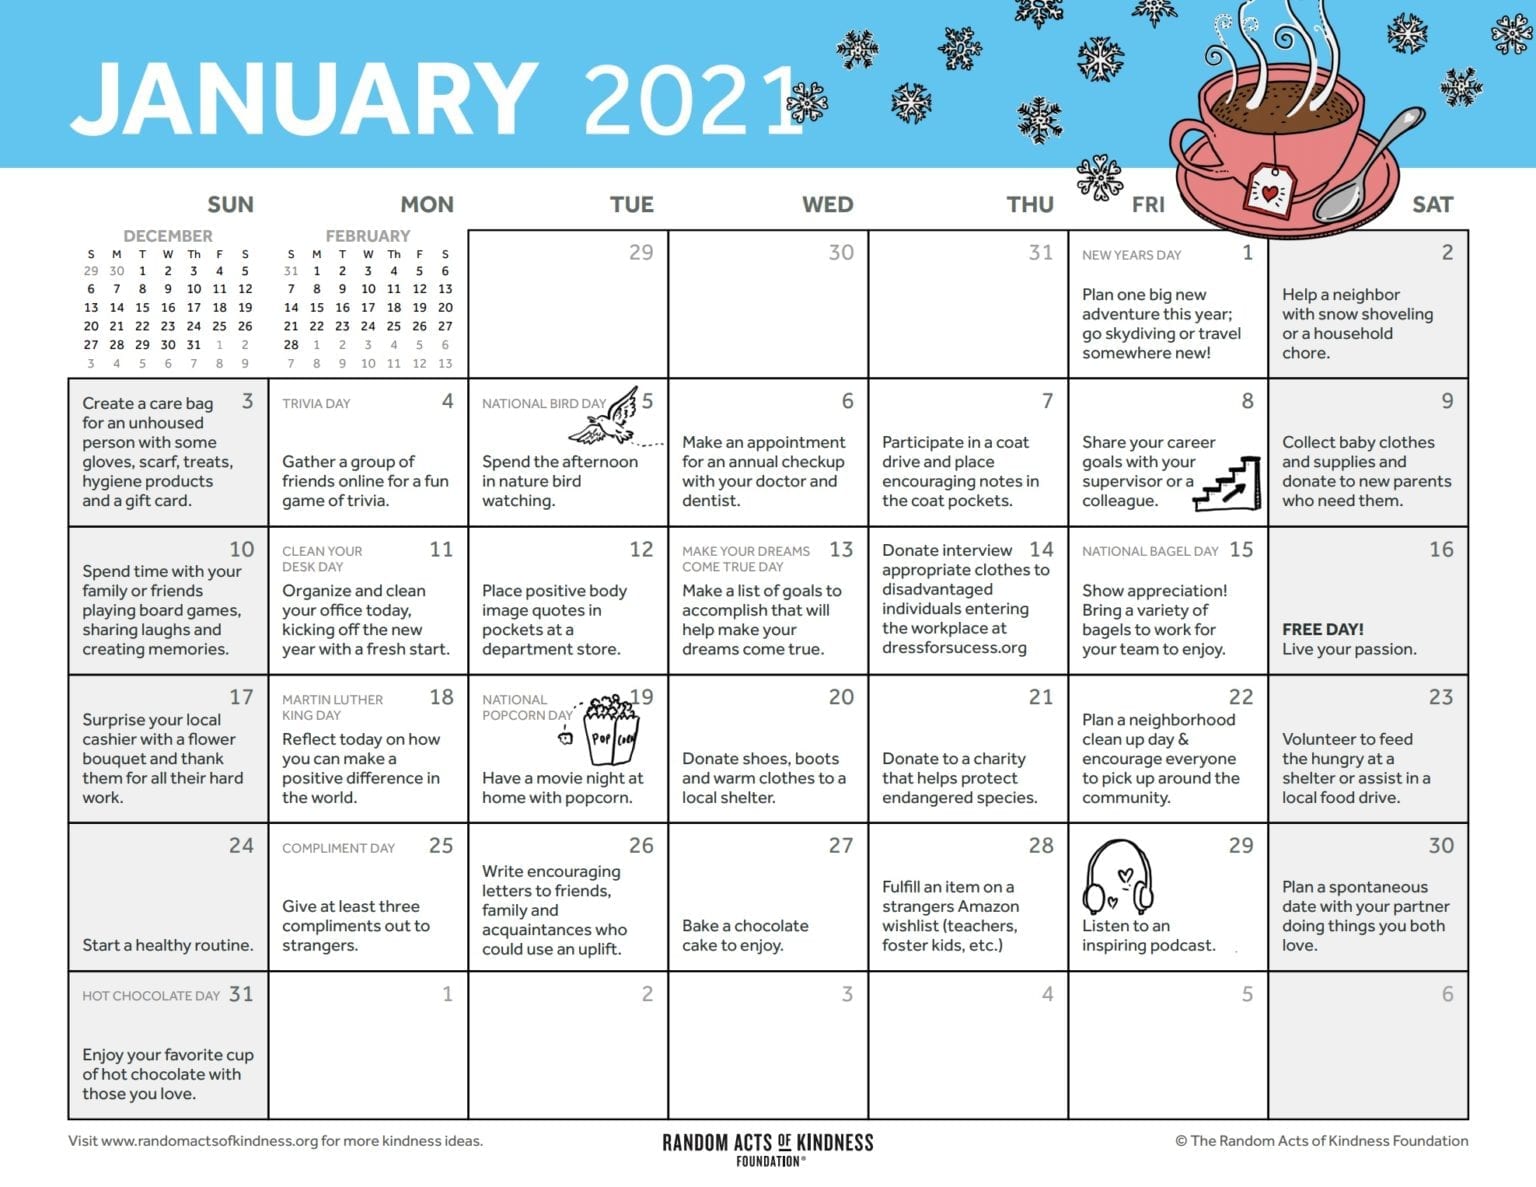 January Kindness Calendar RAOKF Schedule - Young Americans Center